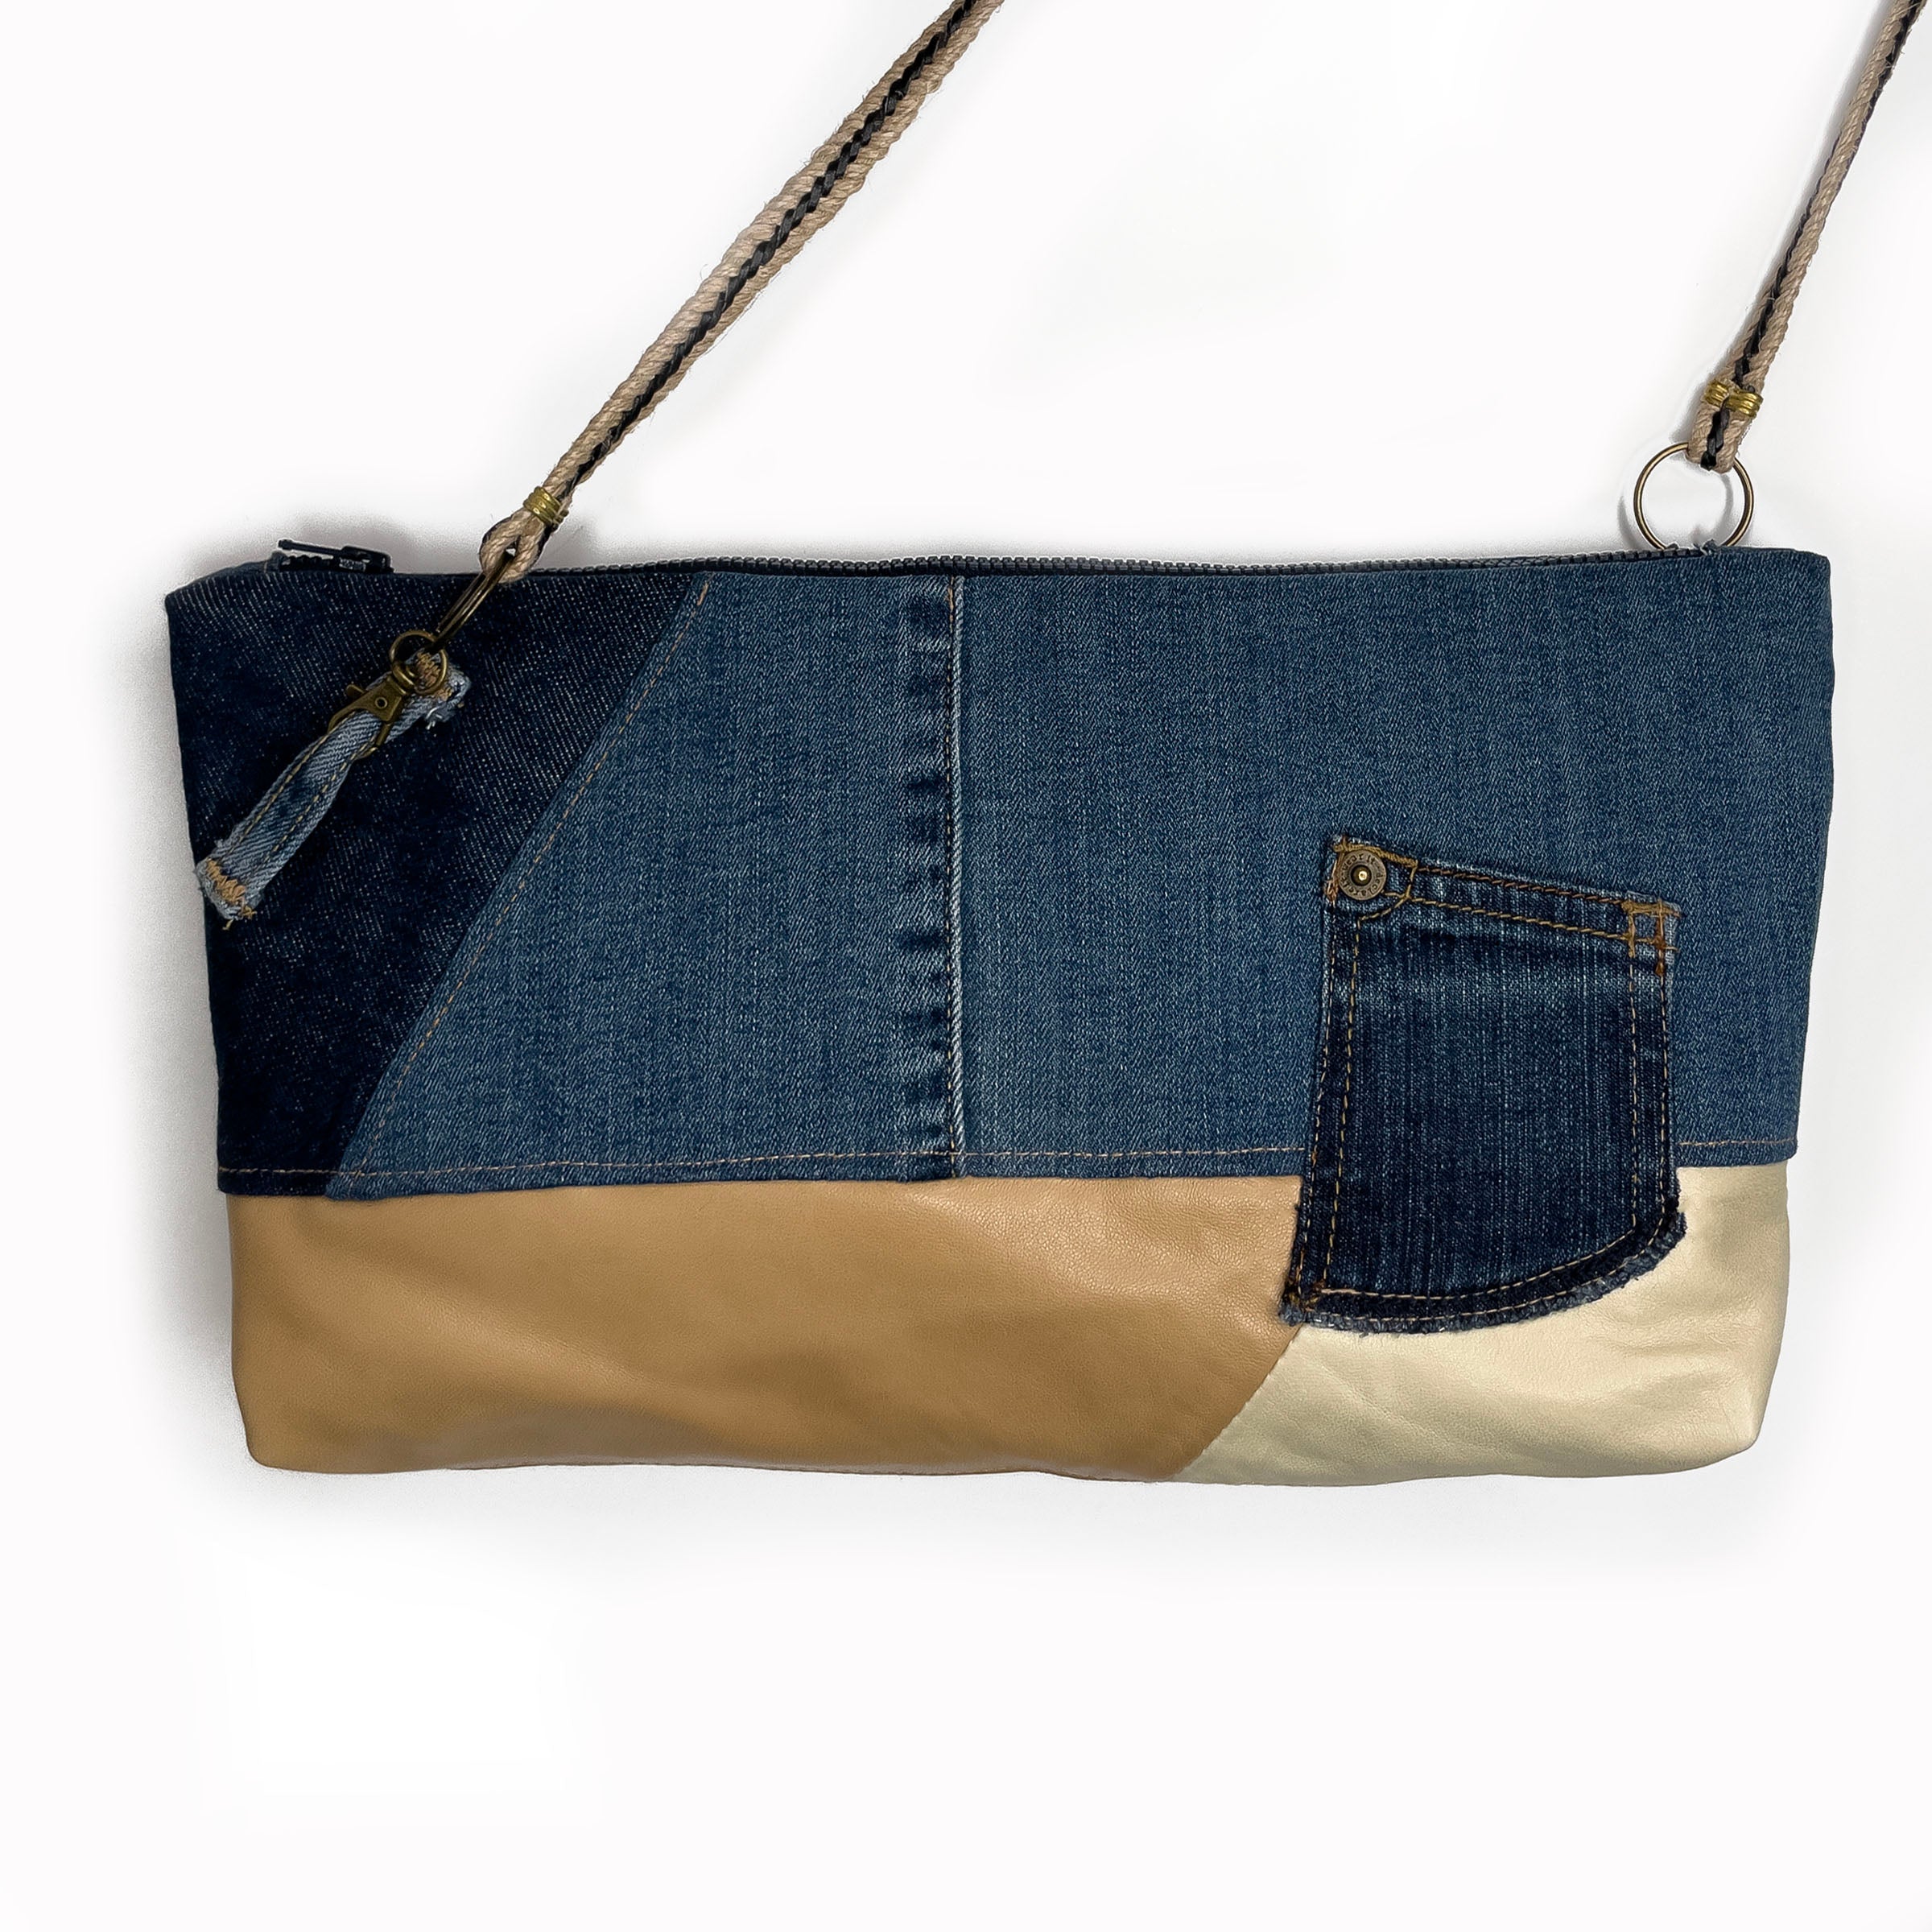 DIY Pants to Purse: How to Turn Your Old Jeans into a Shoulder Bag